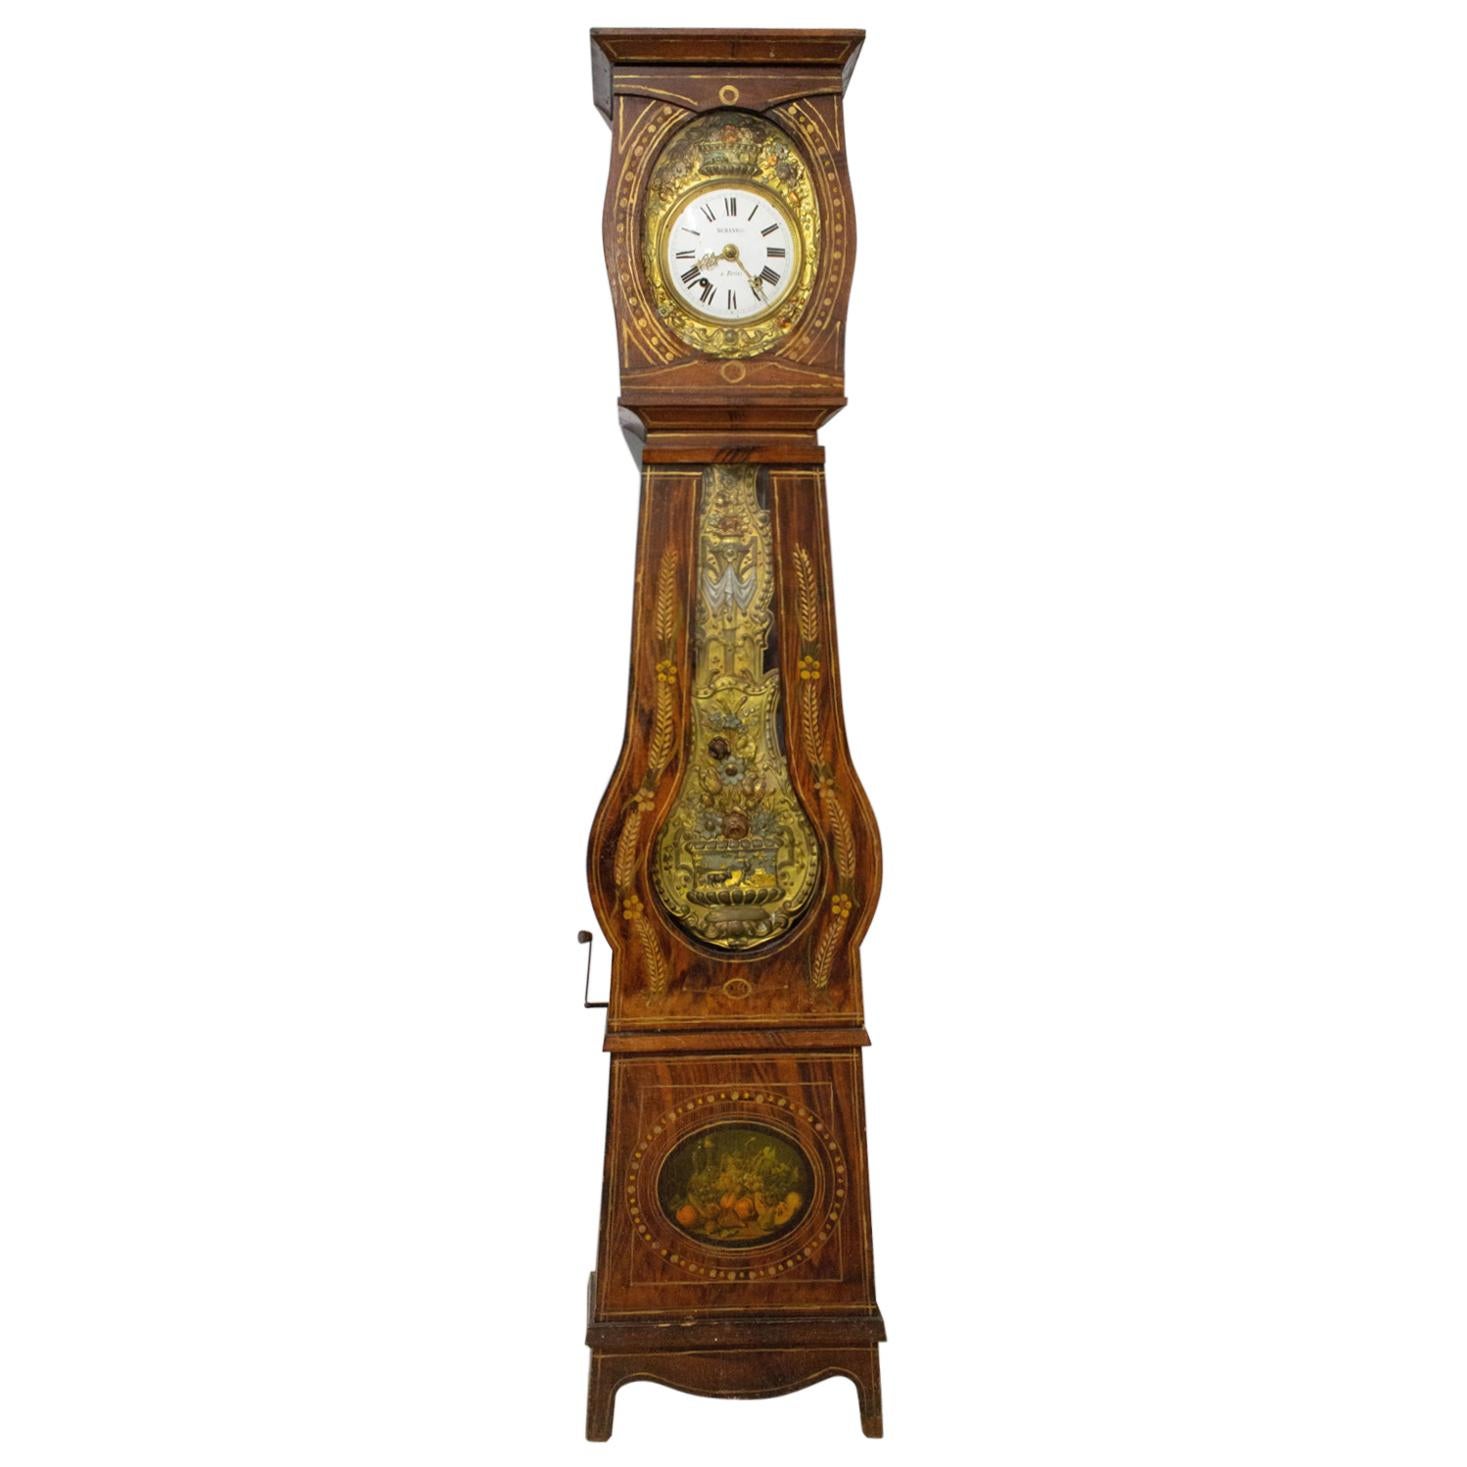 19th Century French Empire Comtoise or Grandfather Clock with Scenes of Farm